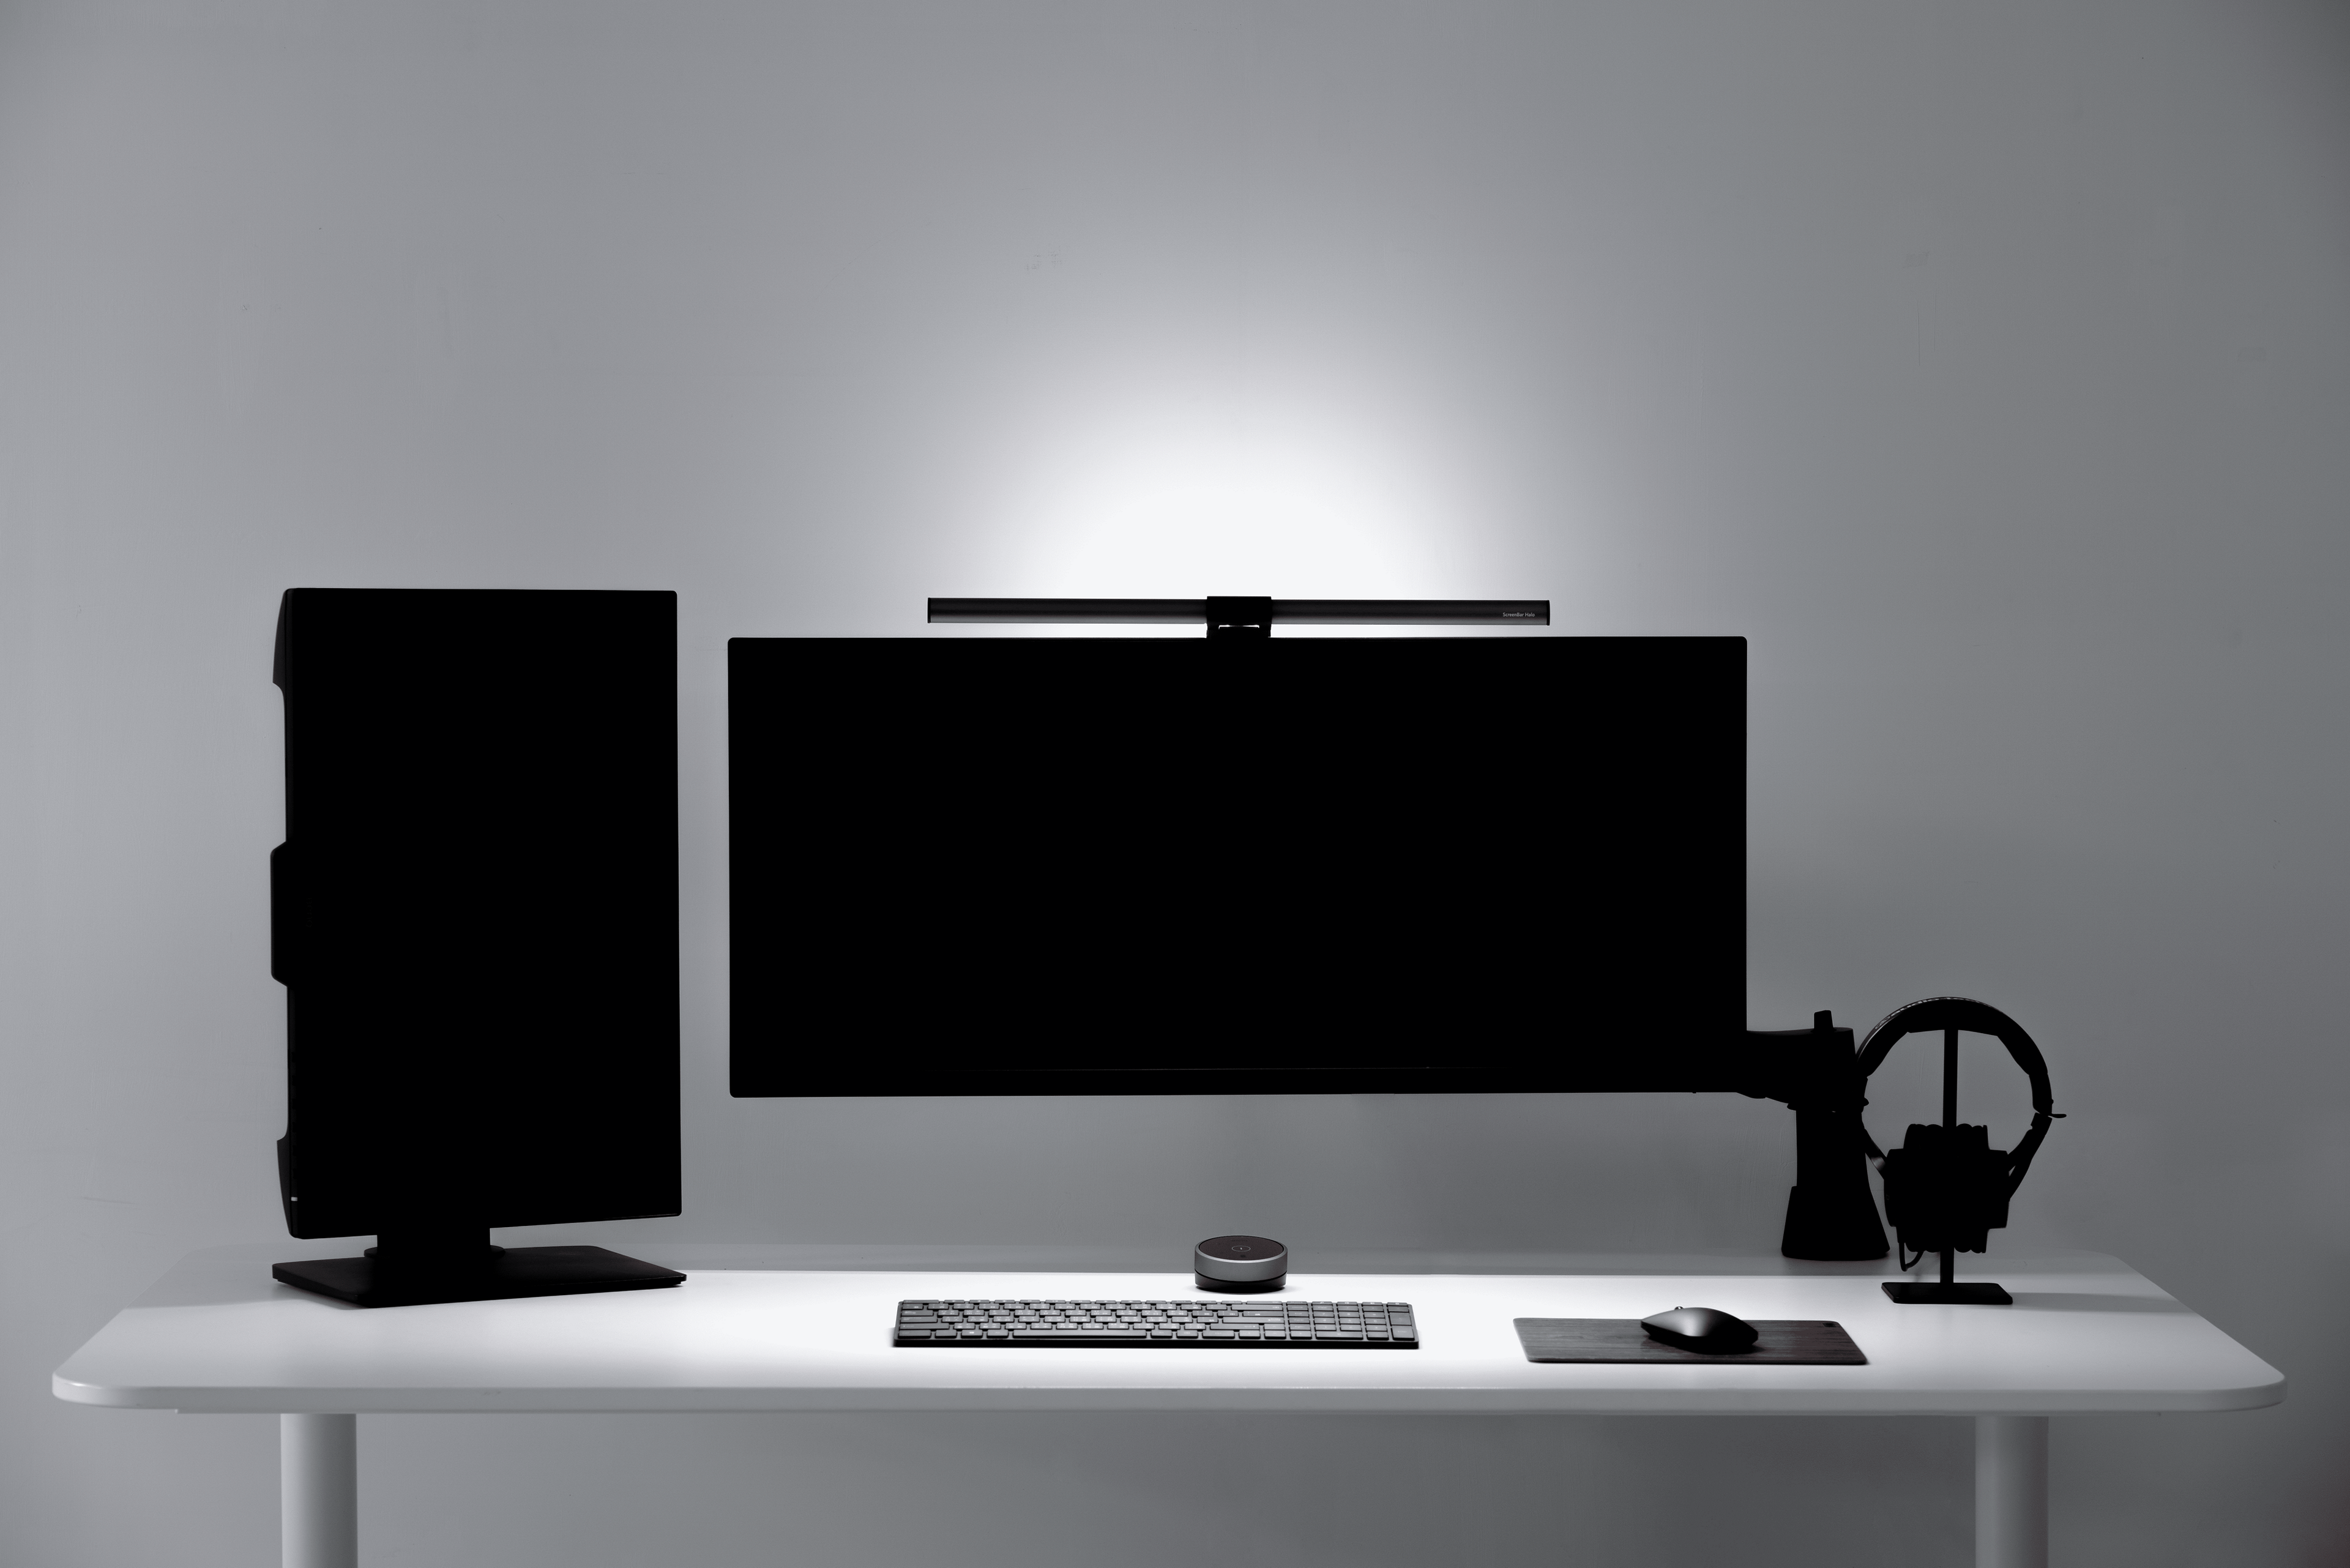 ScreenBar Halo is an innovative lighting solution designed to reduce eye strain while using a monitor.